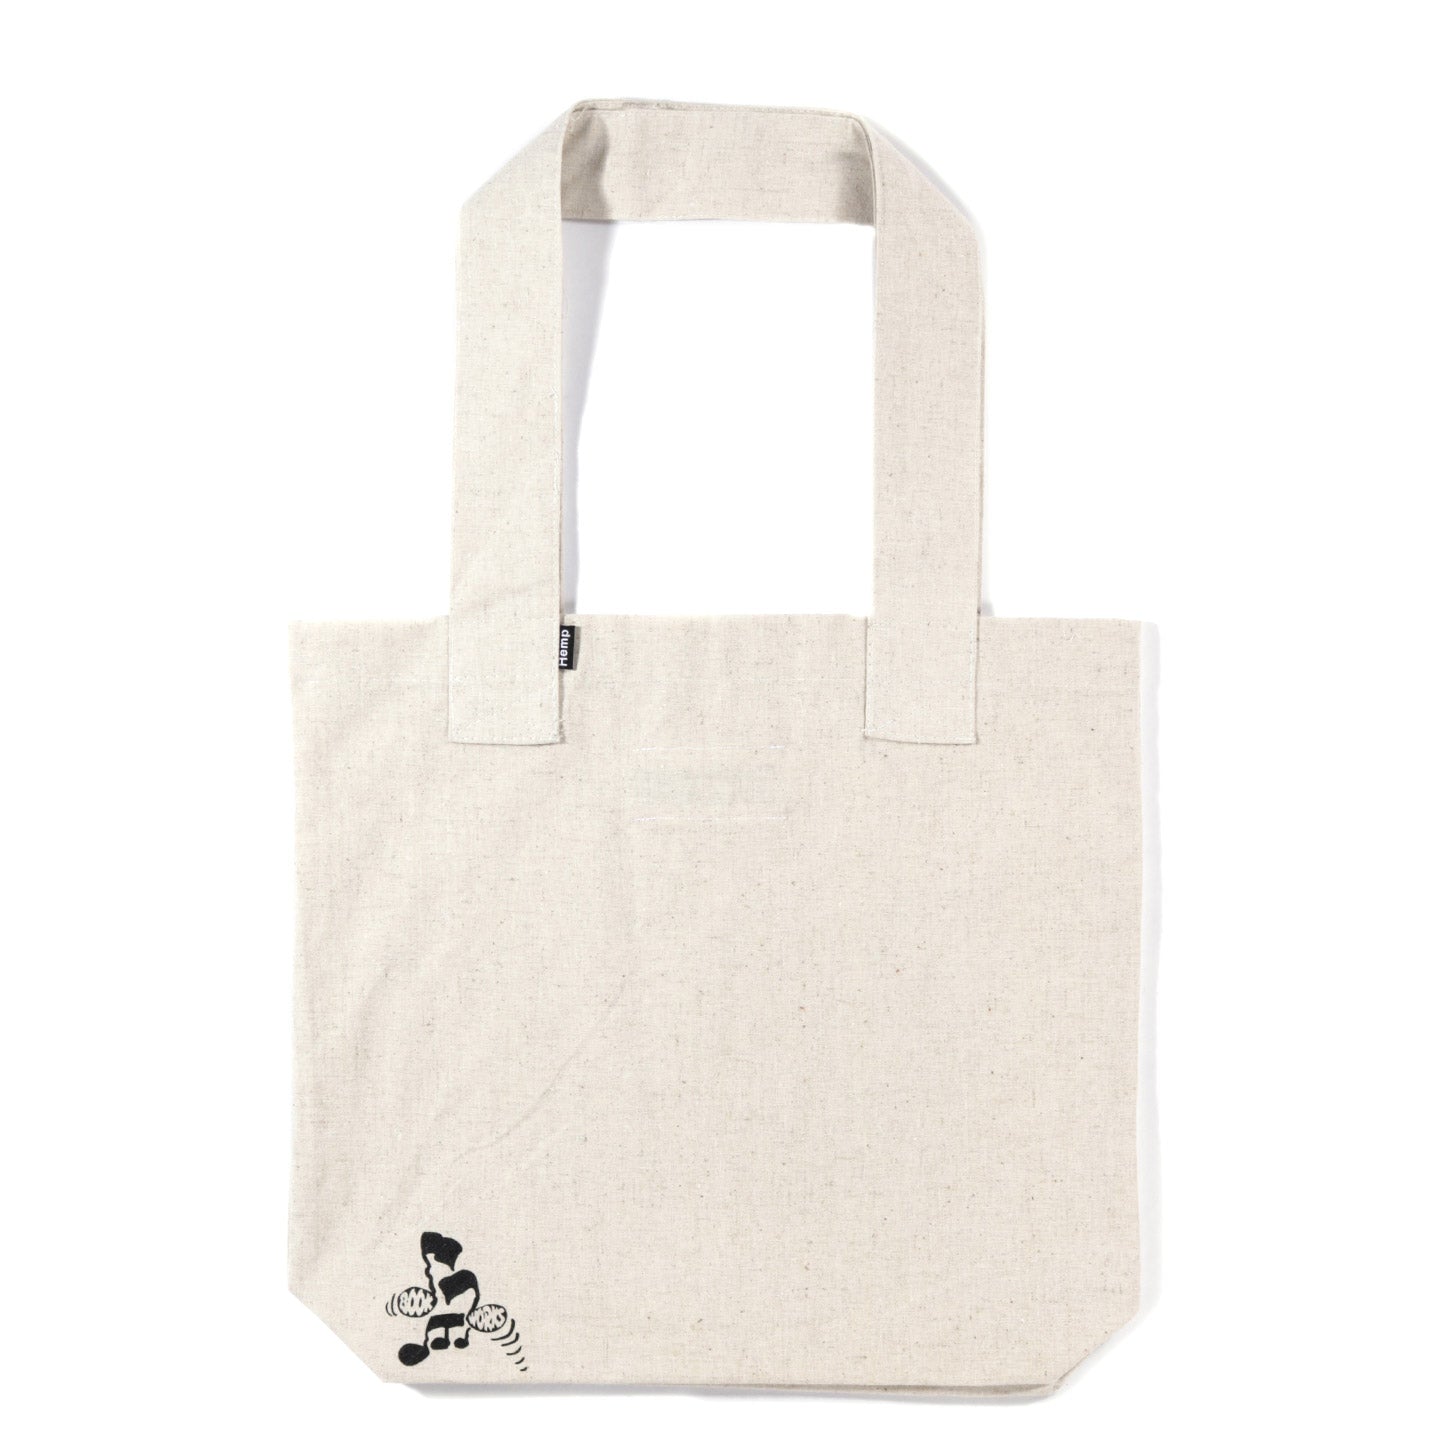 BOOK WORKS CAPTAIN JAZZ TOTE